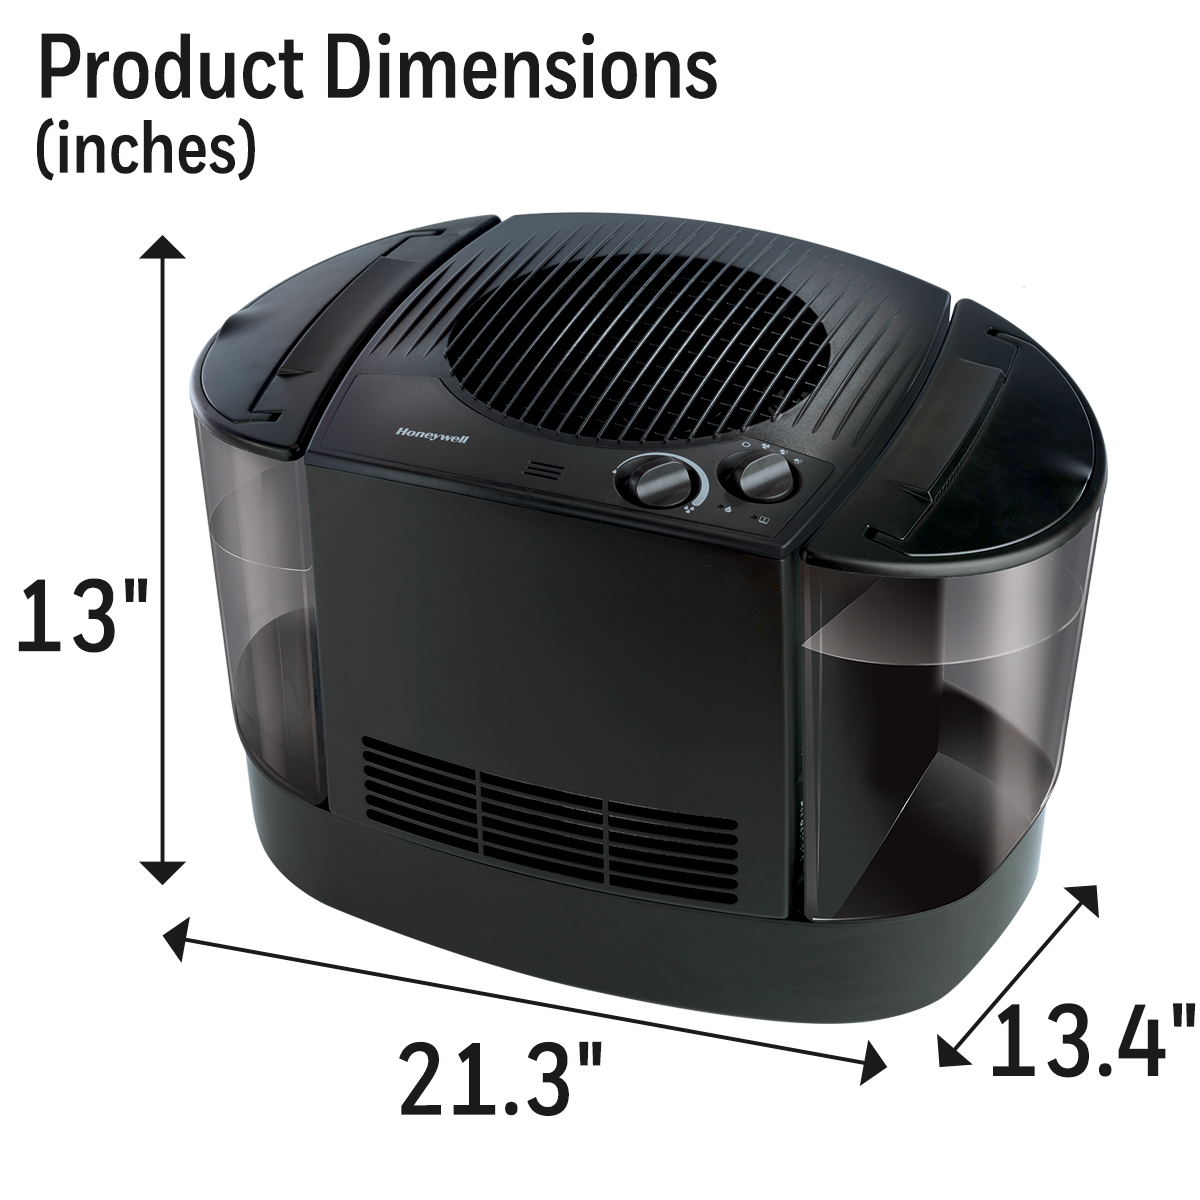 Honeywell 3 Gallon Top Fill Console Humidifier, HEV685B, Black - image 3 of 9